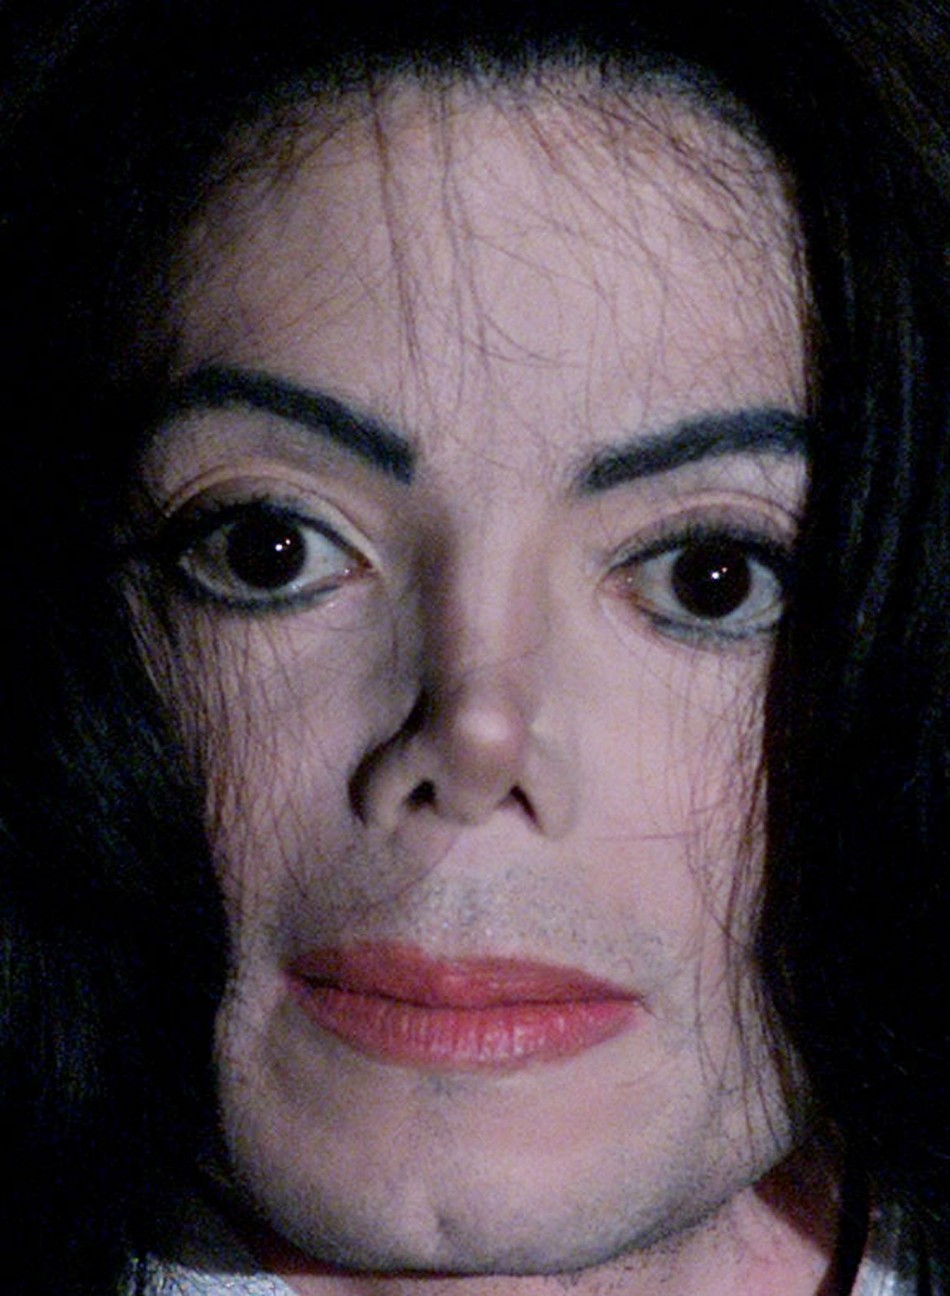 Michael Jackson's Changing Faces Through the Years (PHOTOS) .